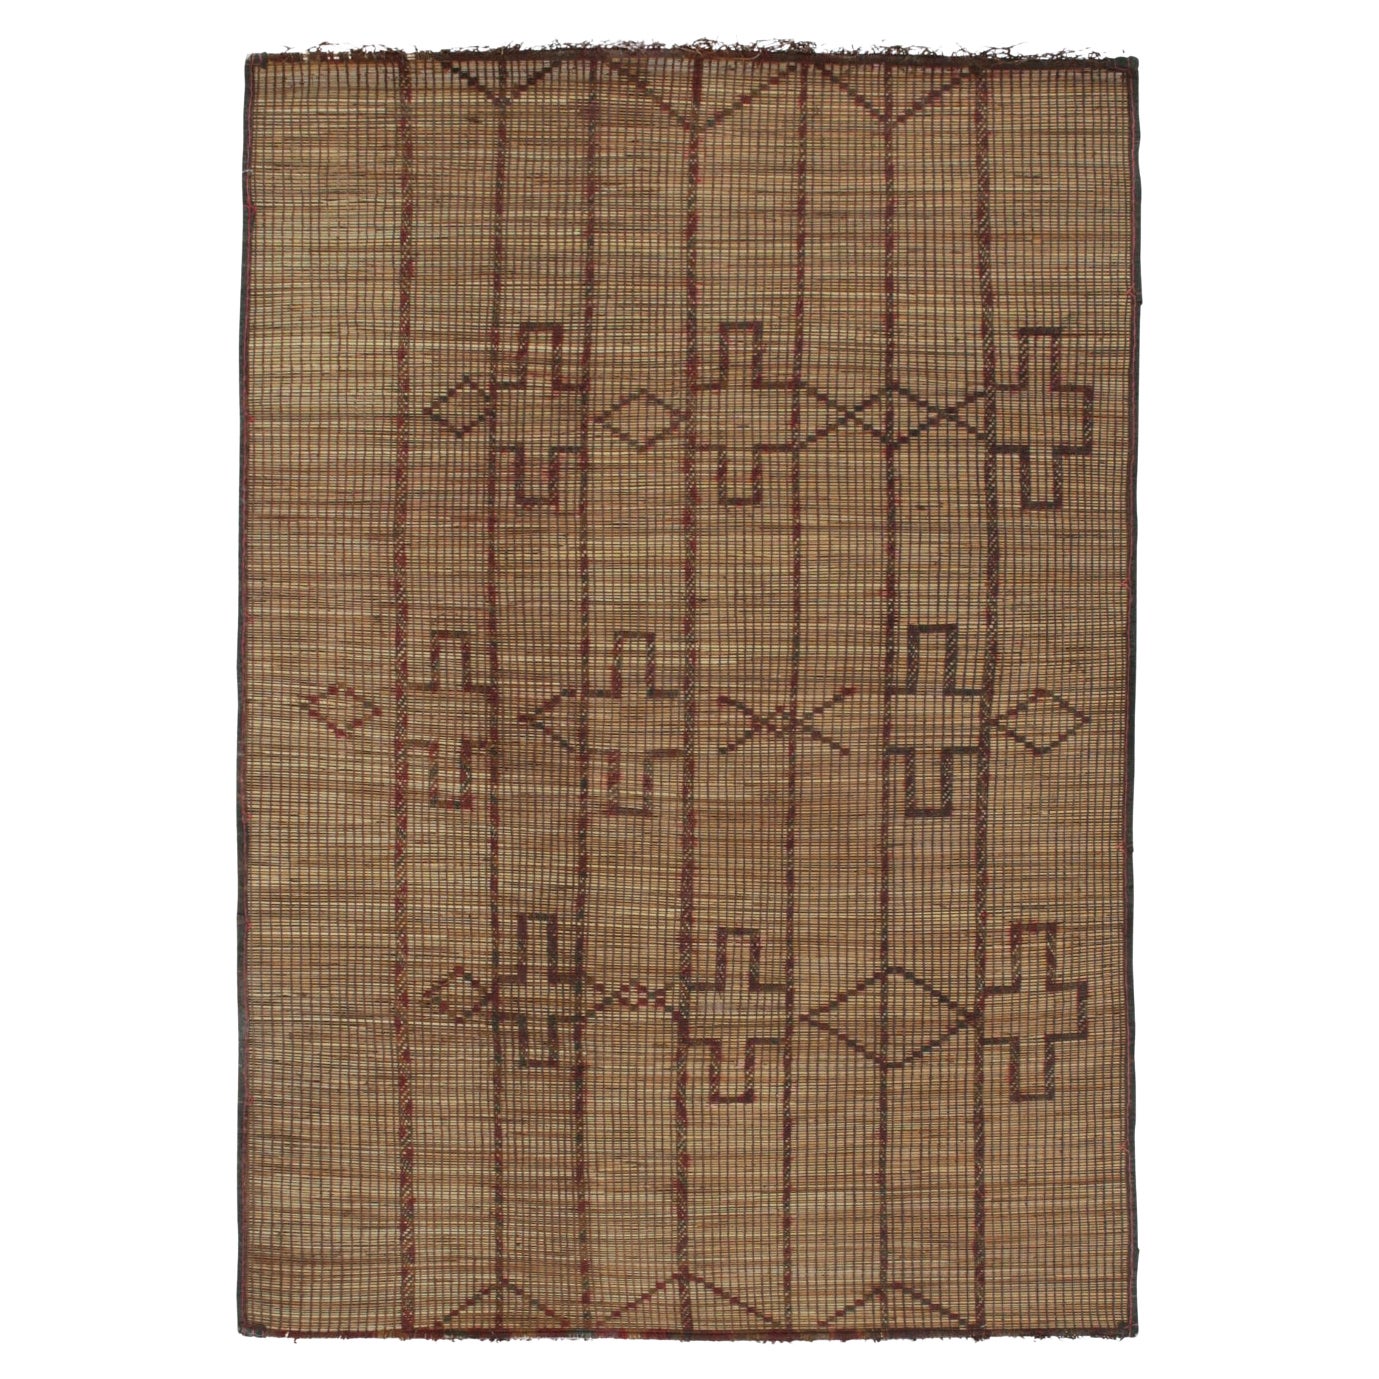 Vintage Moroccan Tuareg Mat in Beige & Brown Geometric Pattern, from Rug & Kilim For Sale